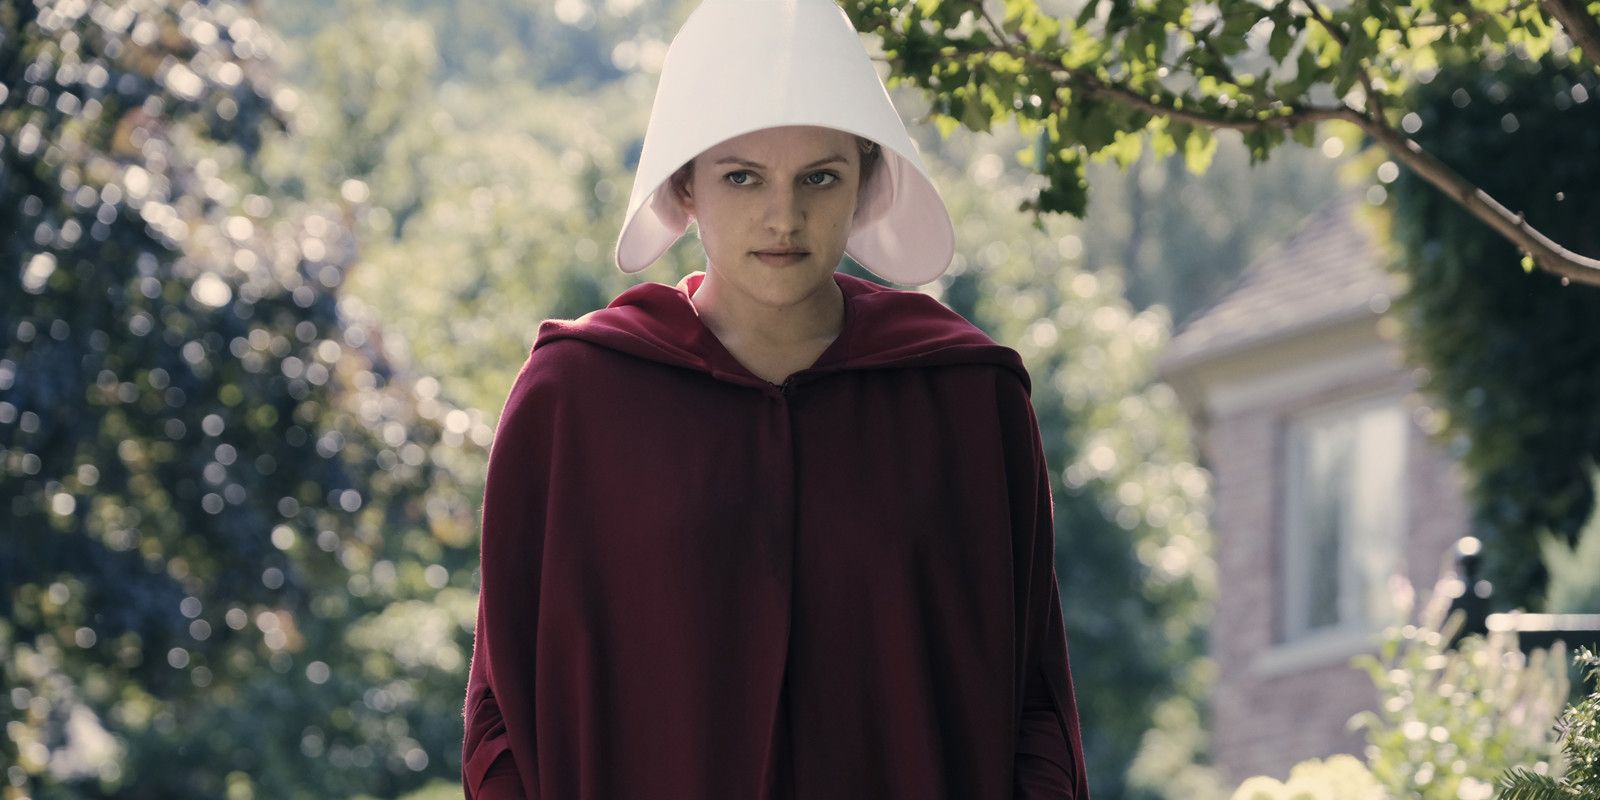 Elisabeth Moss as Offred/June in The Handmaid's Tale